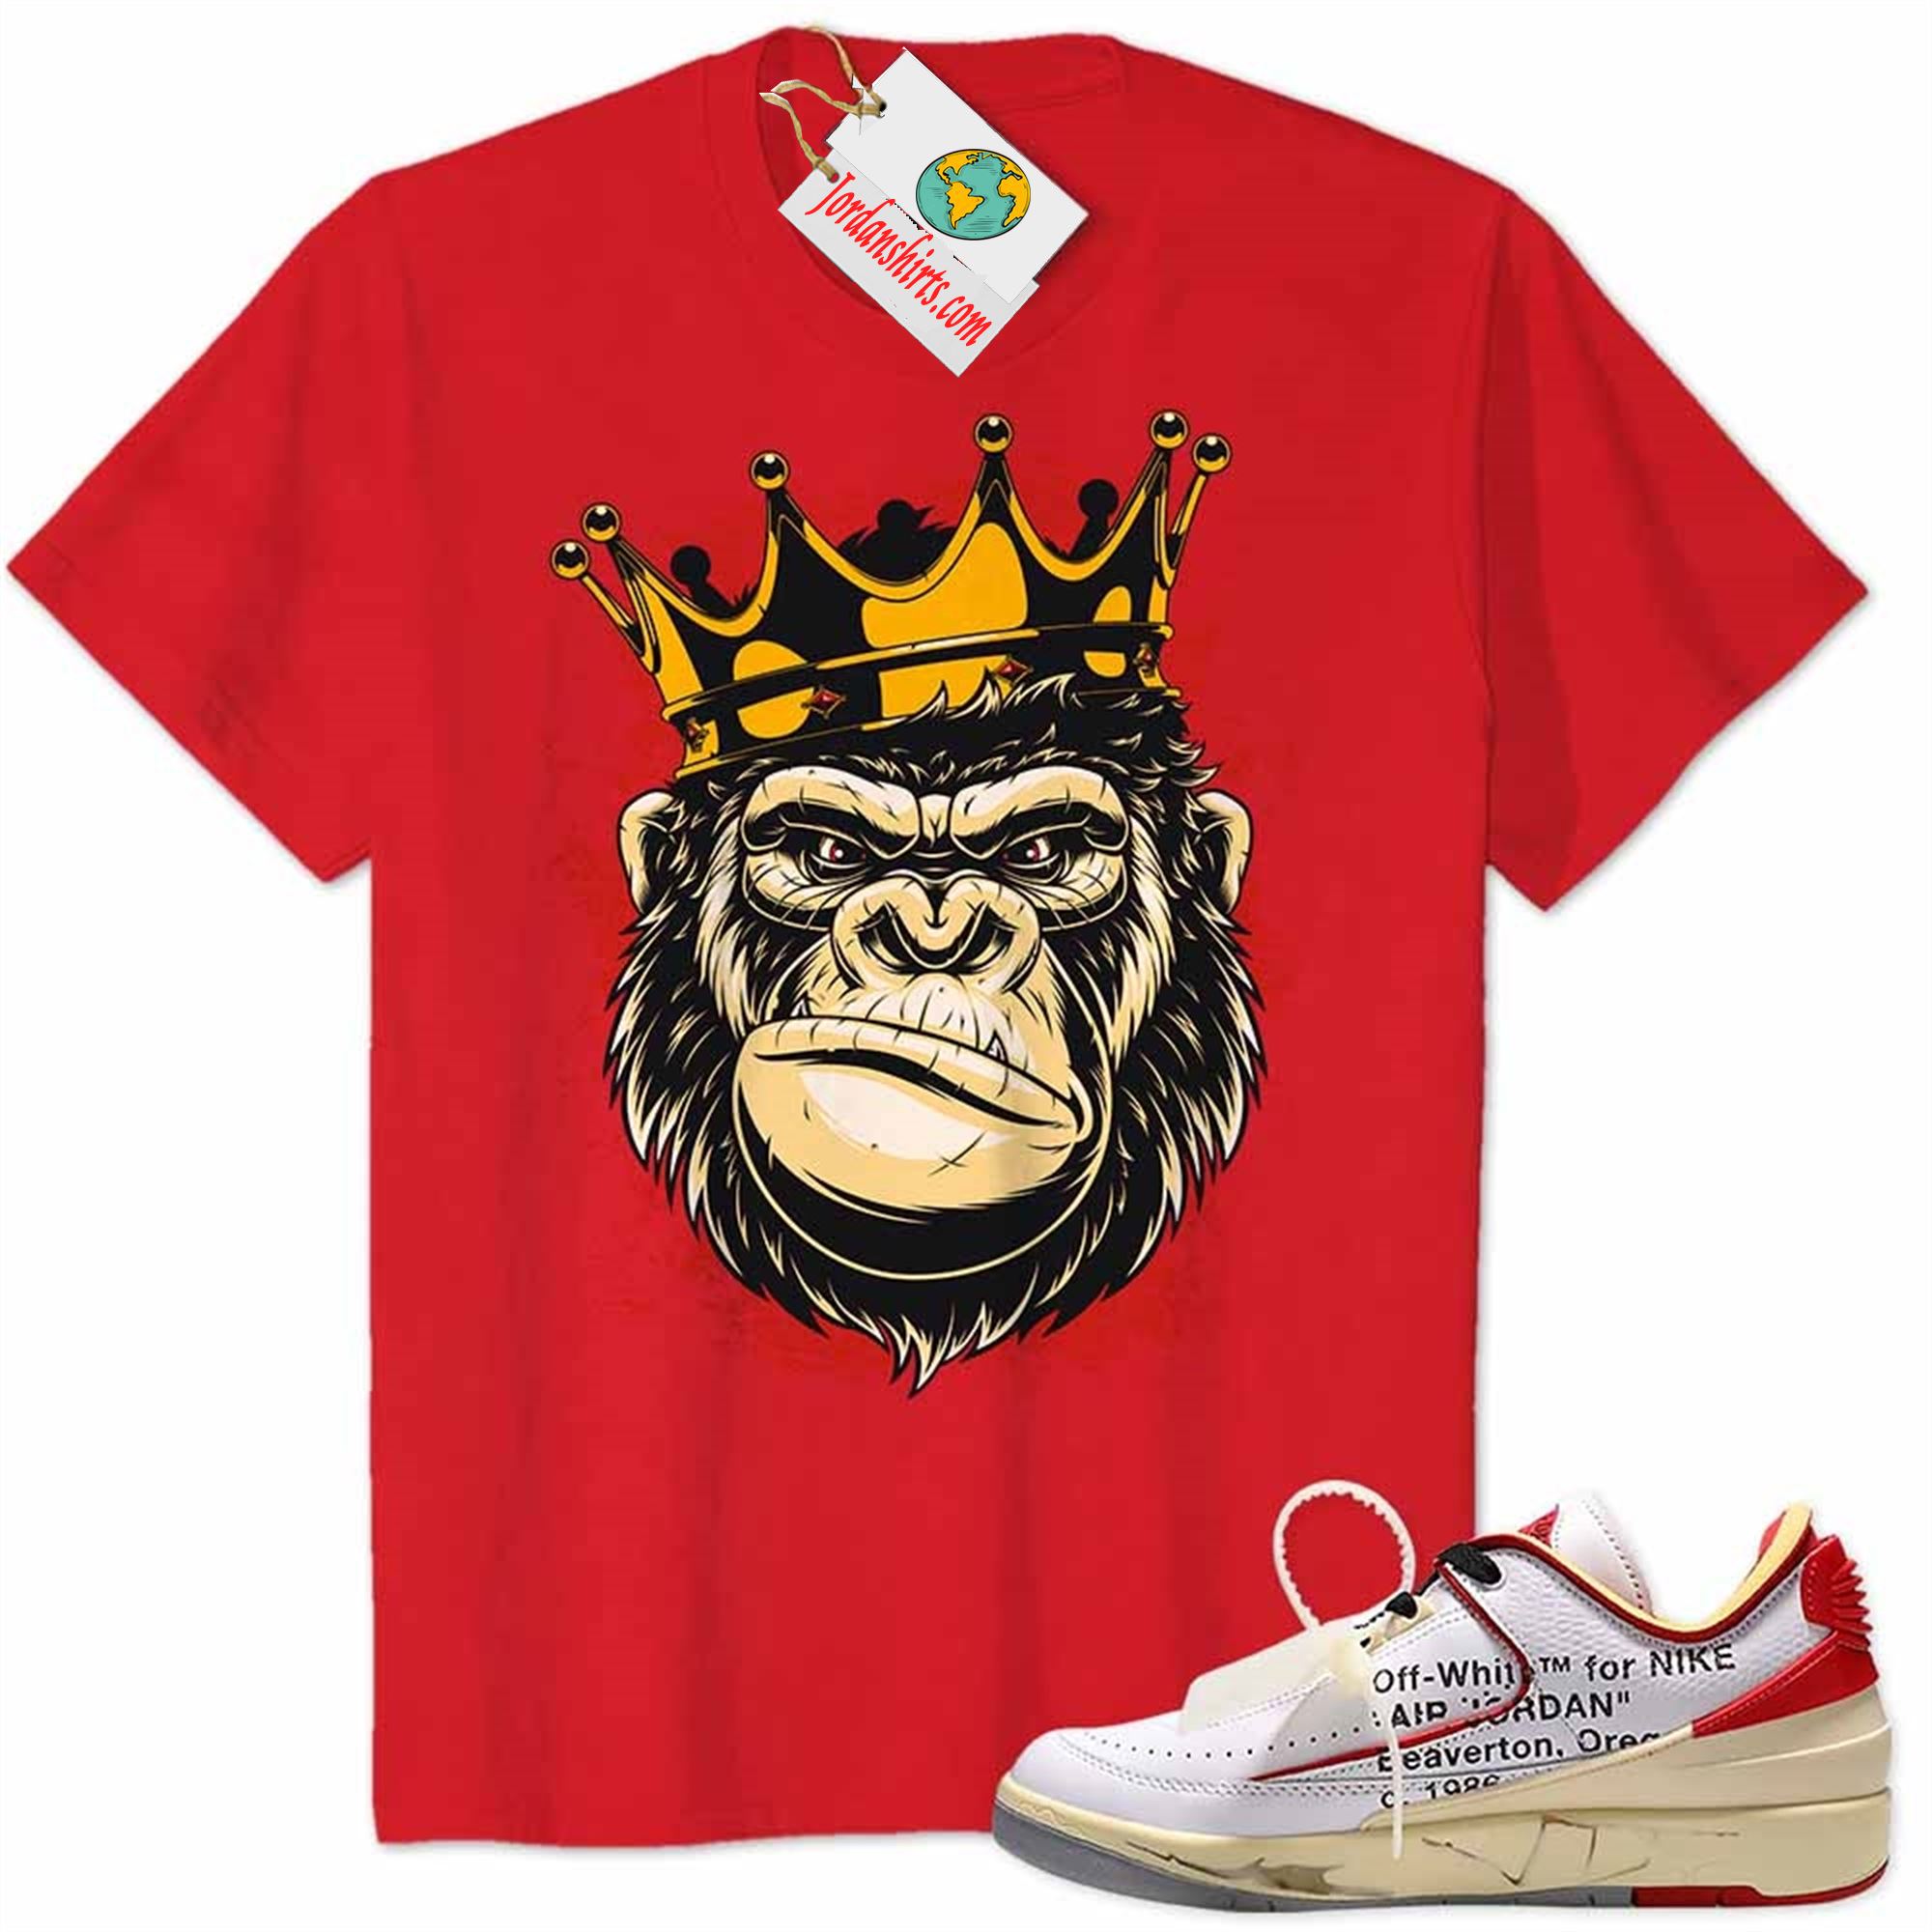 Jordan 2 Shirt, The Gorilla King With Crown Red Air Jordan 2 Low White Red Off-white 2s Size Up To 5xl